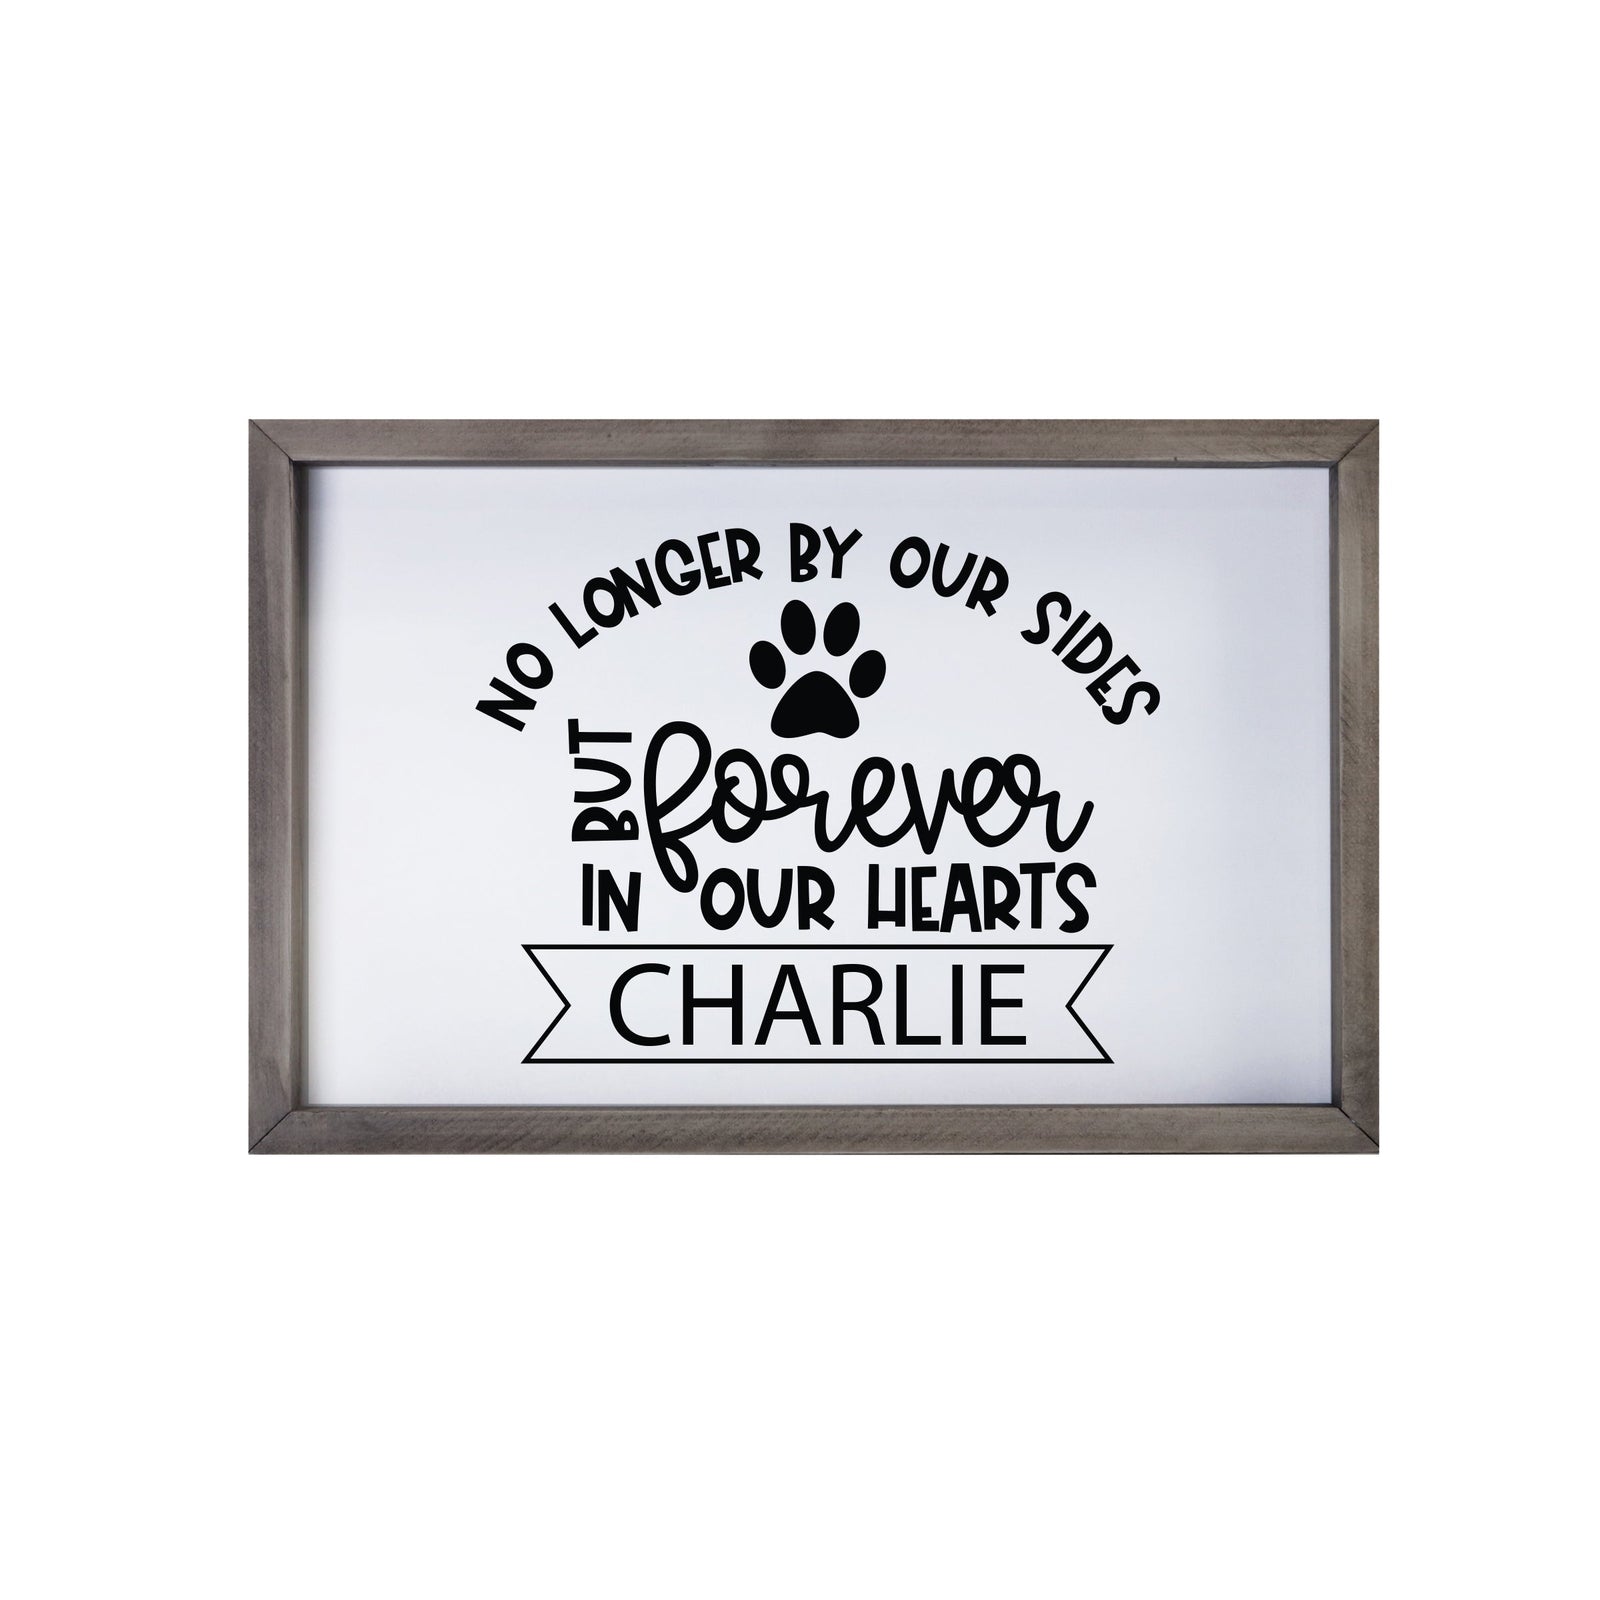 7x10 Grey Framed Pet Memorial Shadow Box with phrase "No Longer By Our Sides"